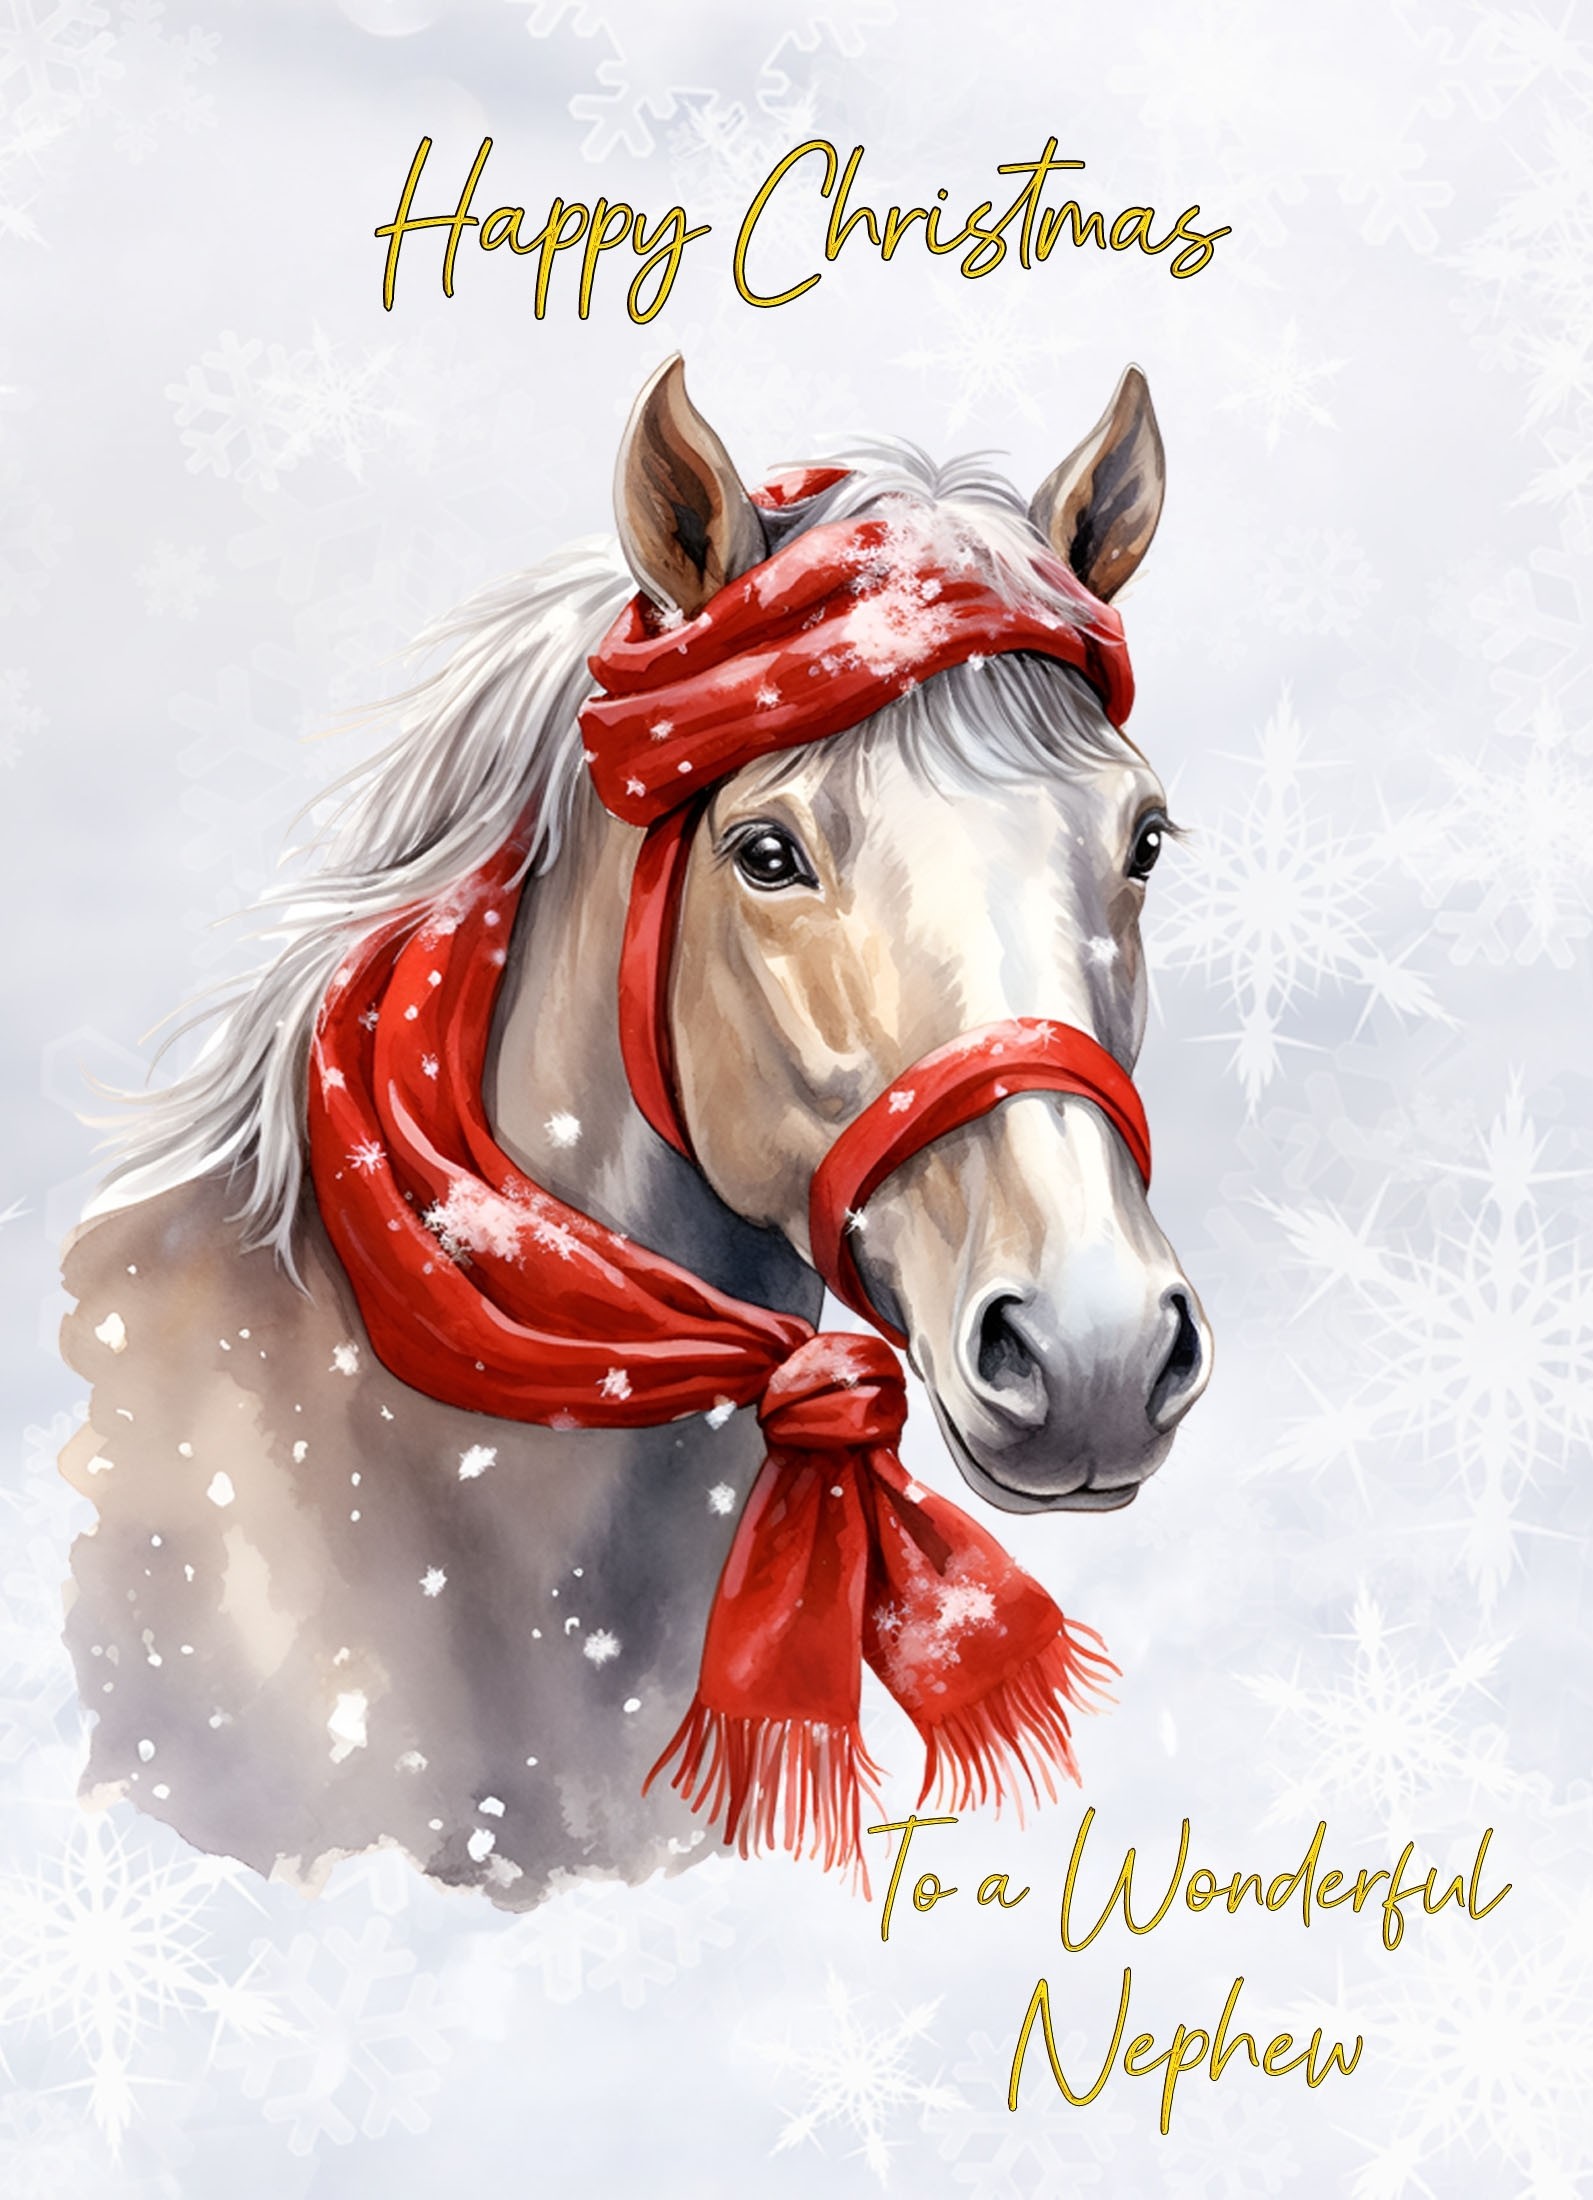 Christmas Card For Nephew (Horse Art Red)